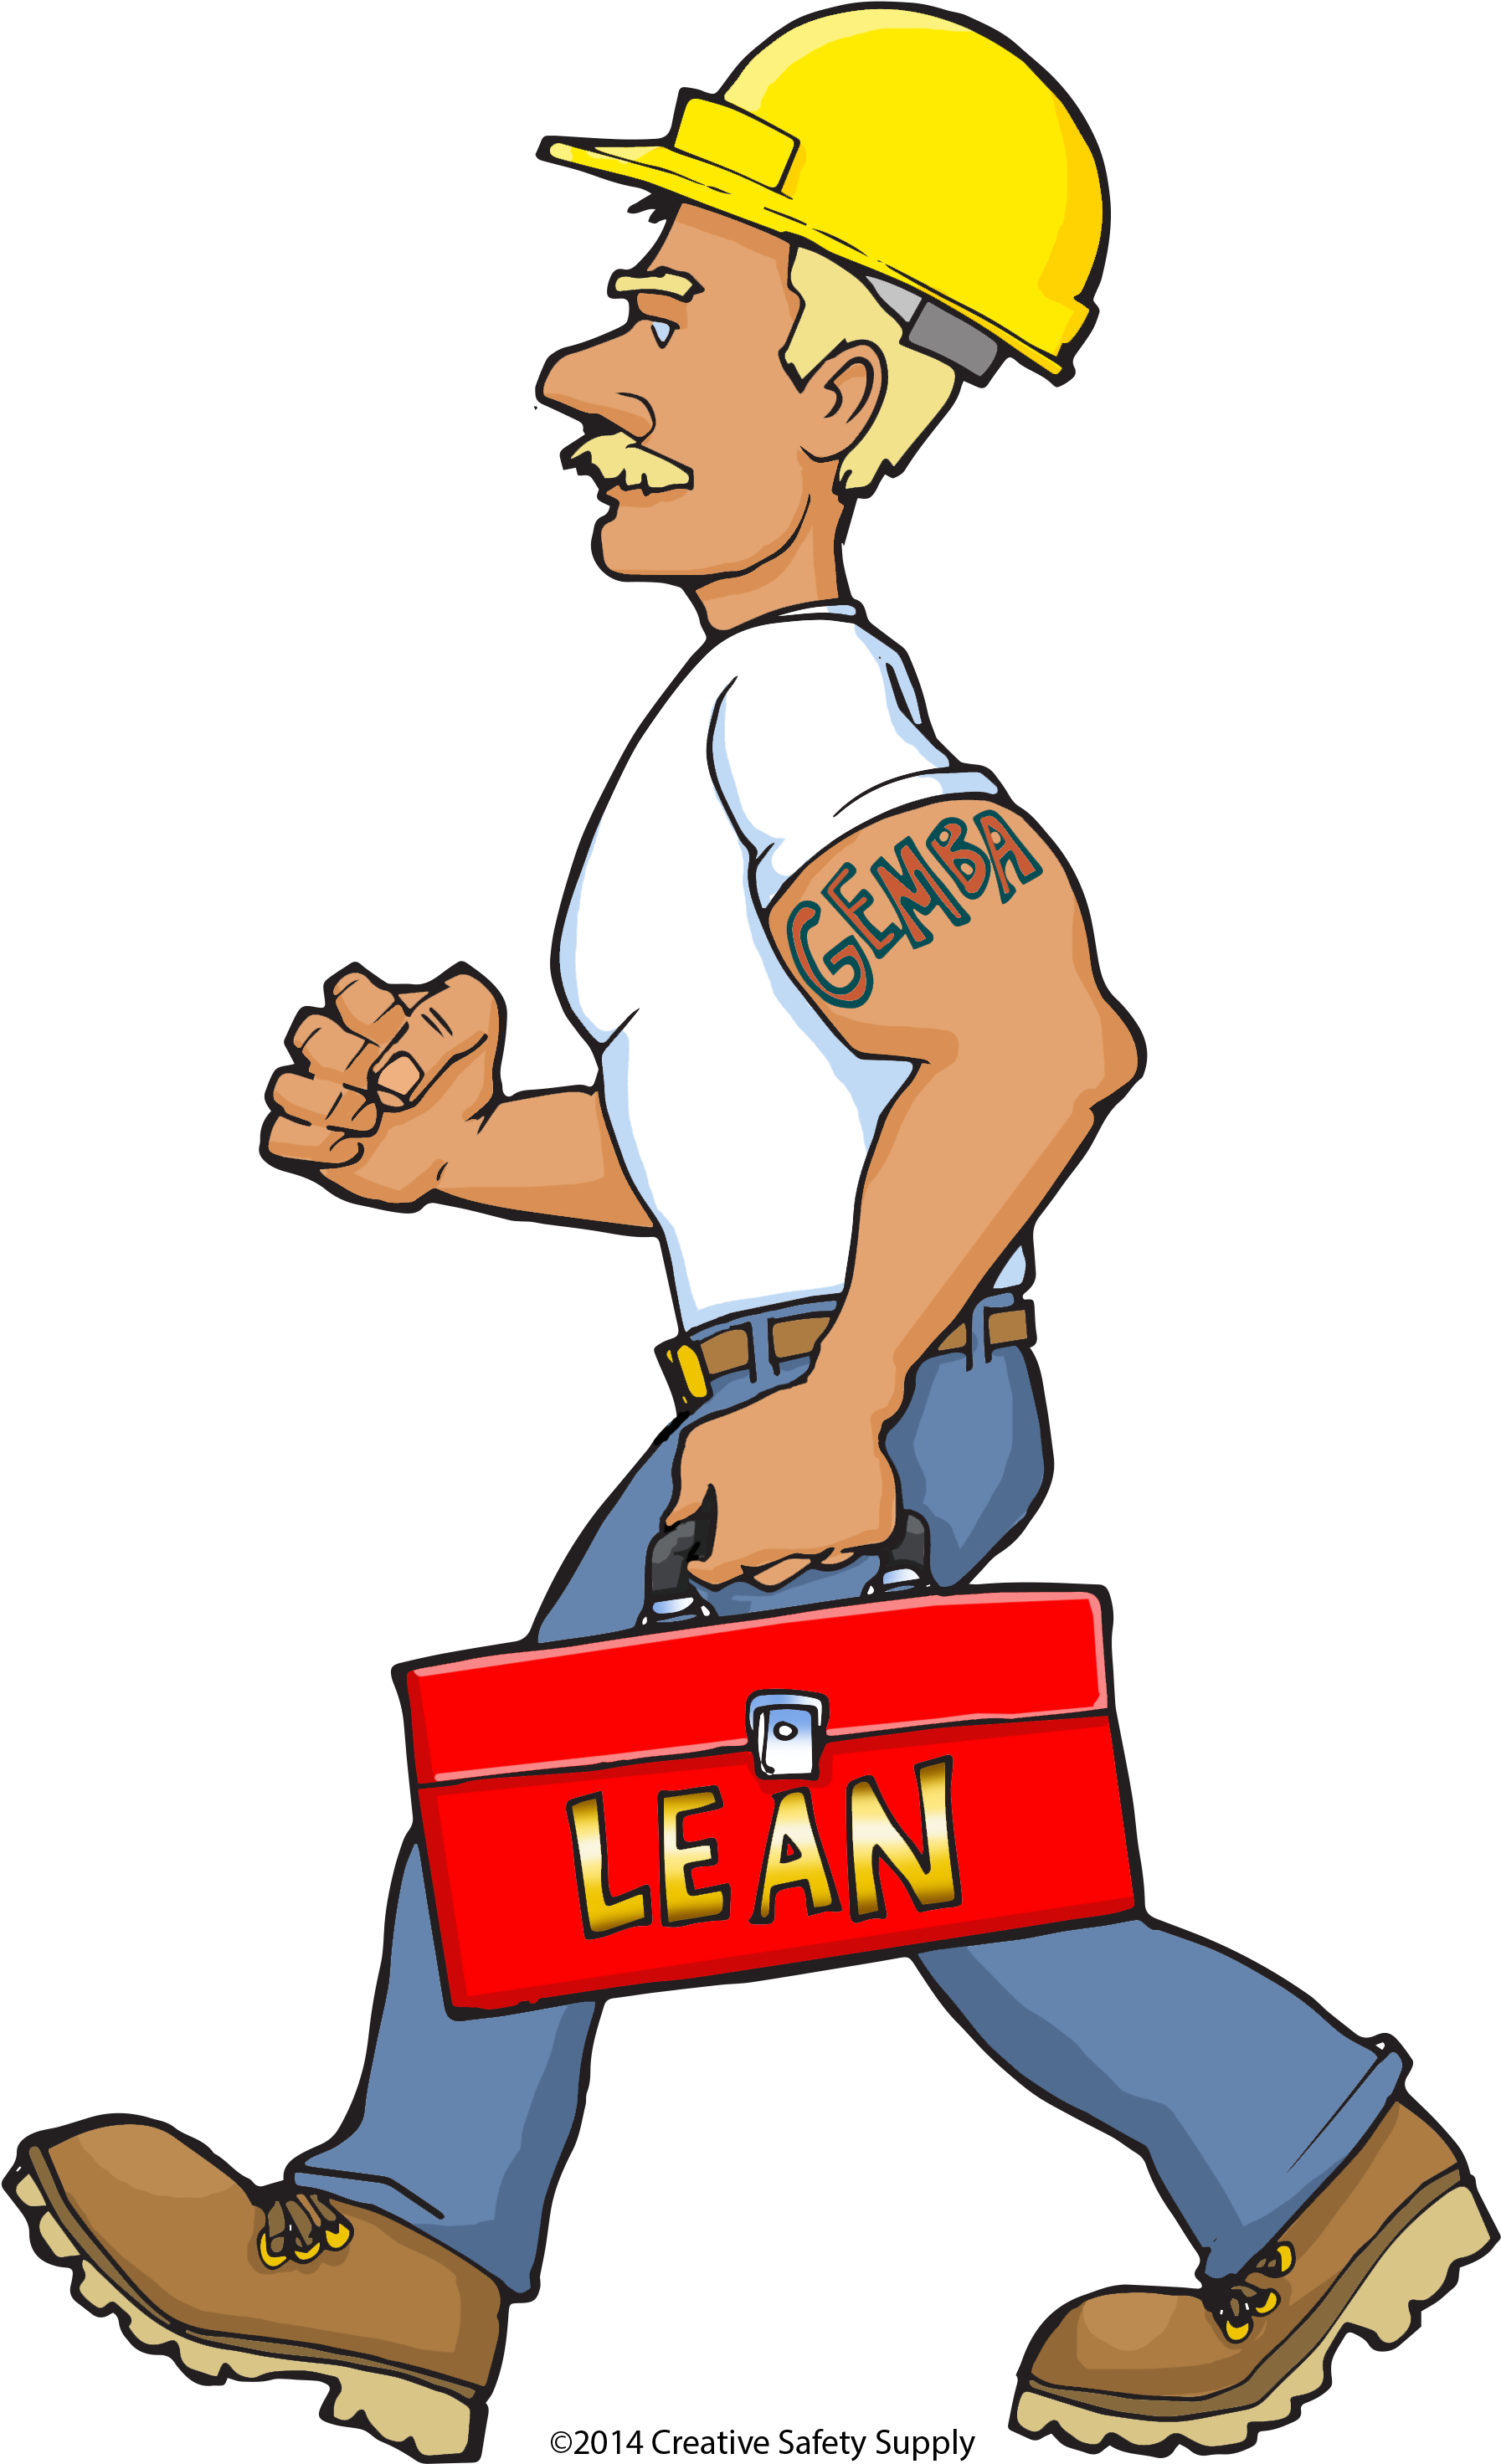 Download and share clipart about Lean Waste Walk, Find more high quality fr...